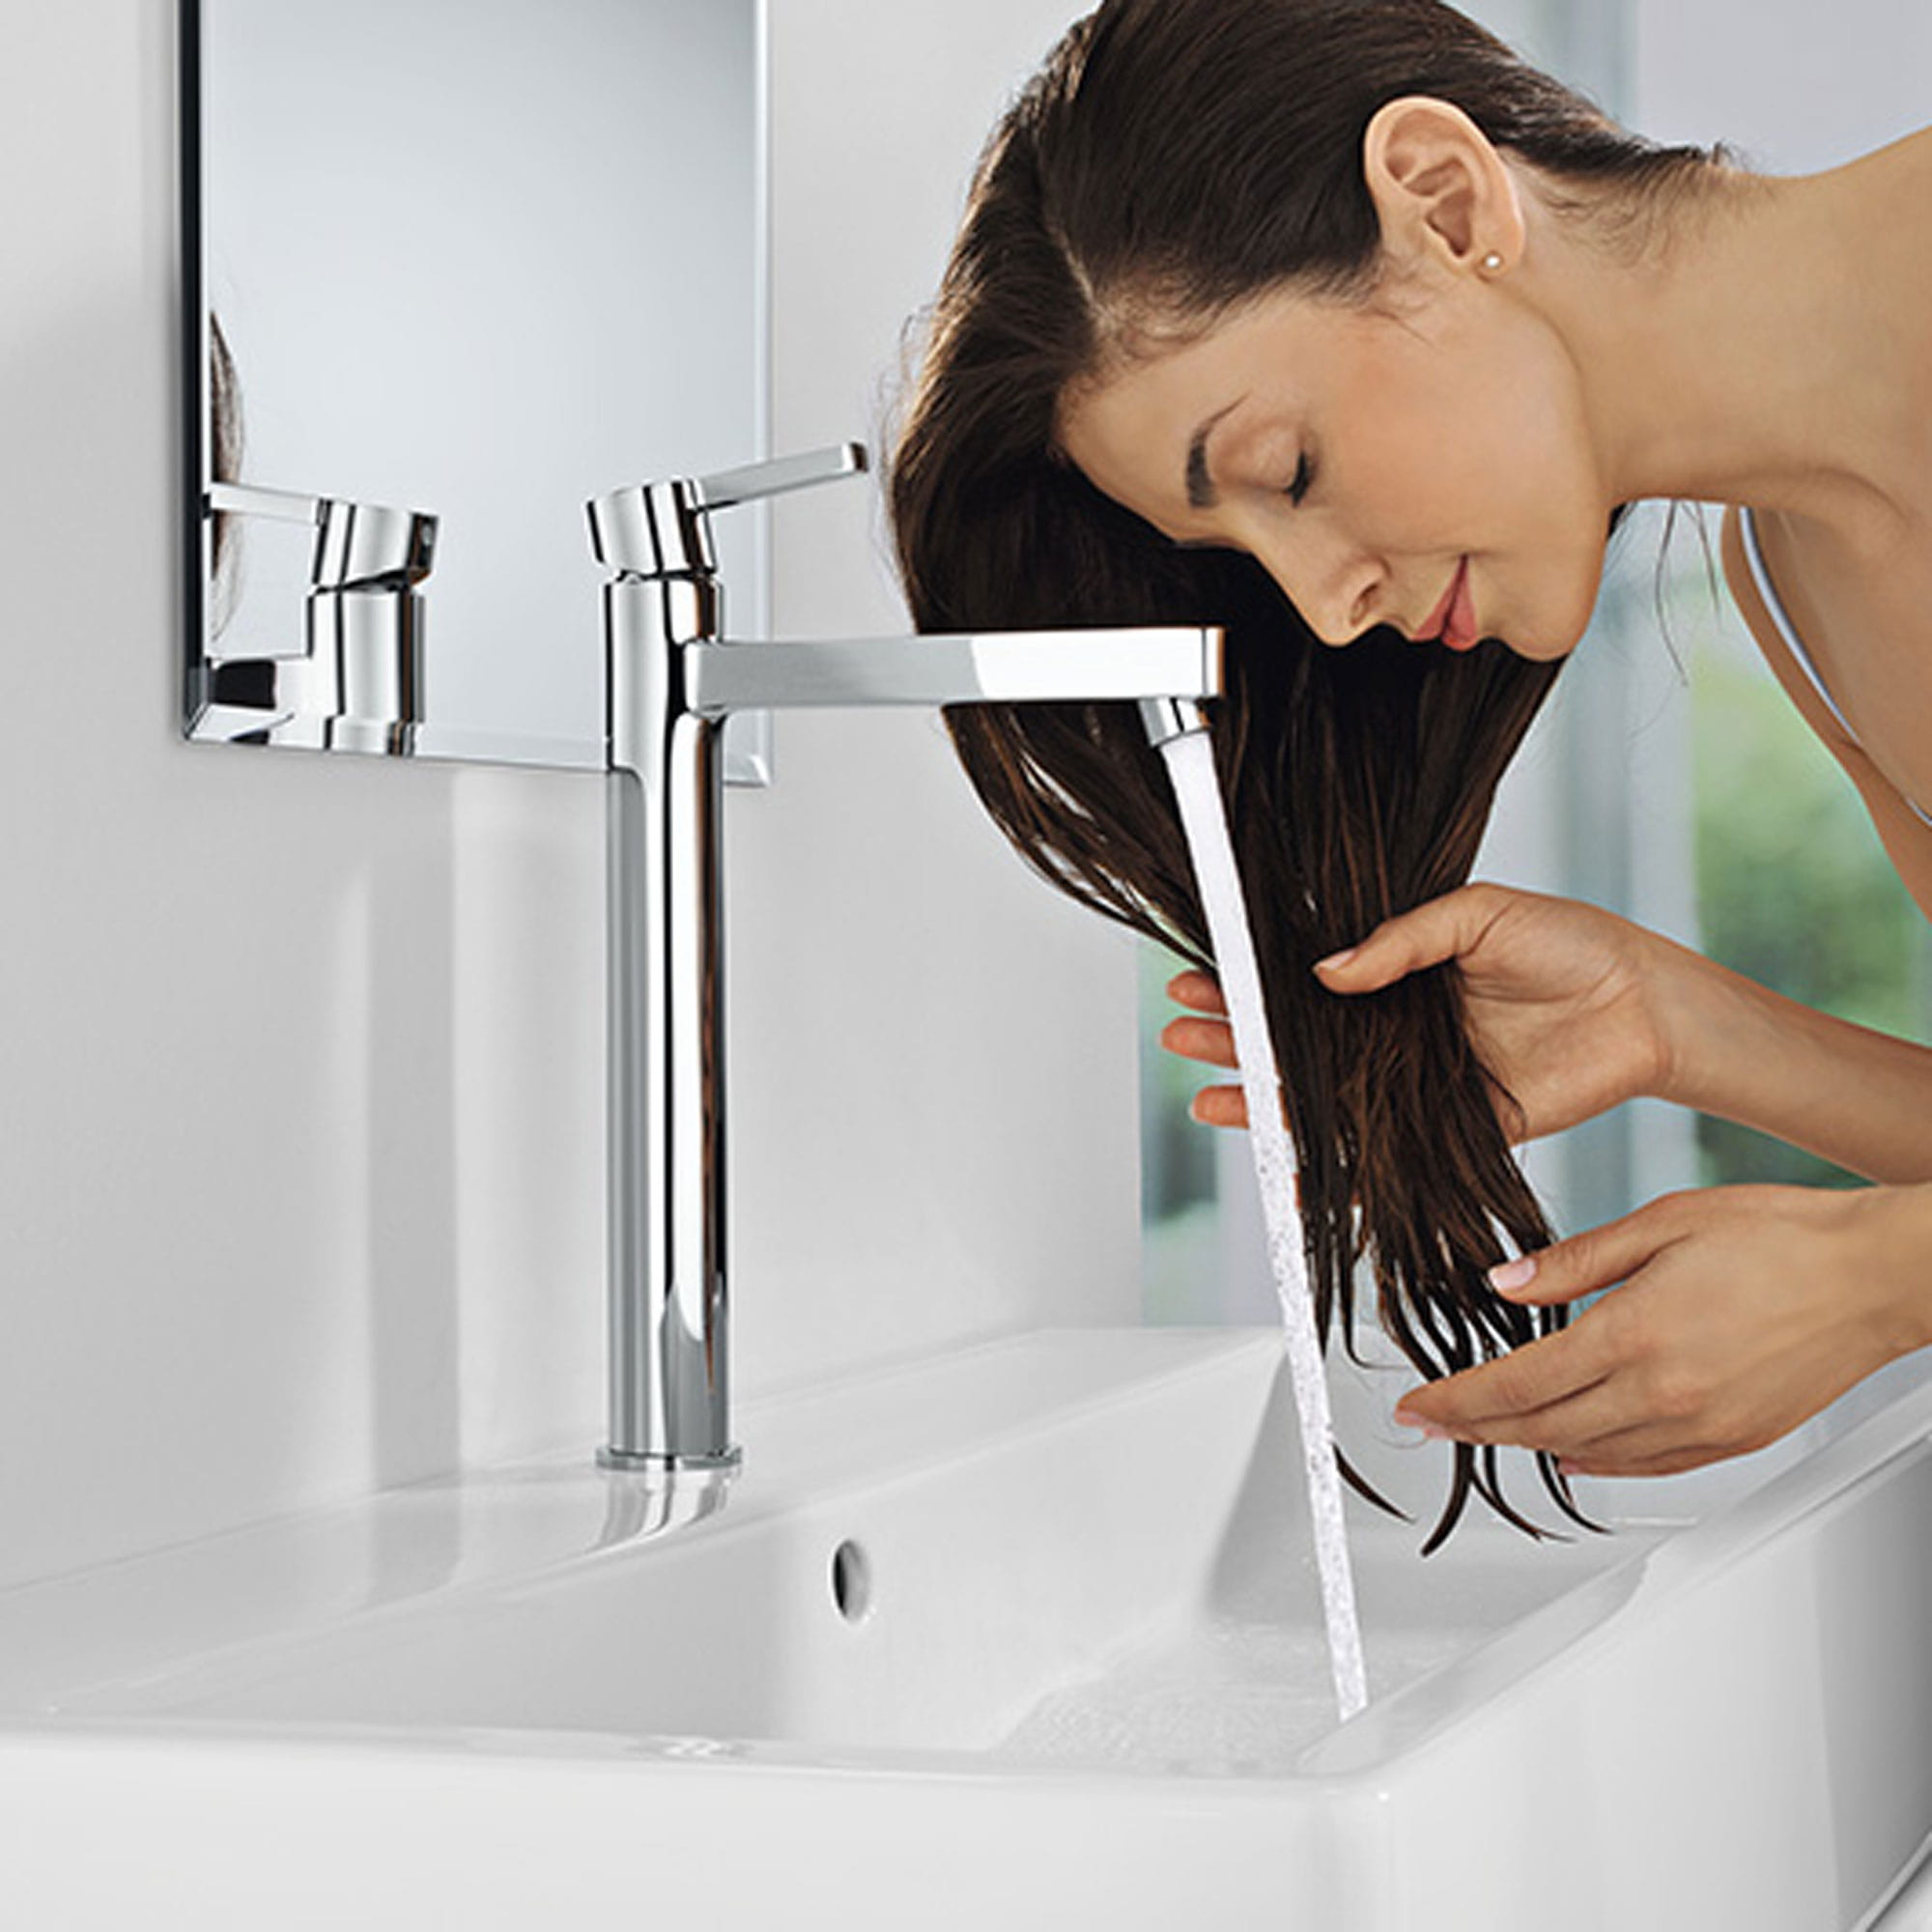 A women washing her hair under a grohe faucet.